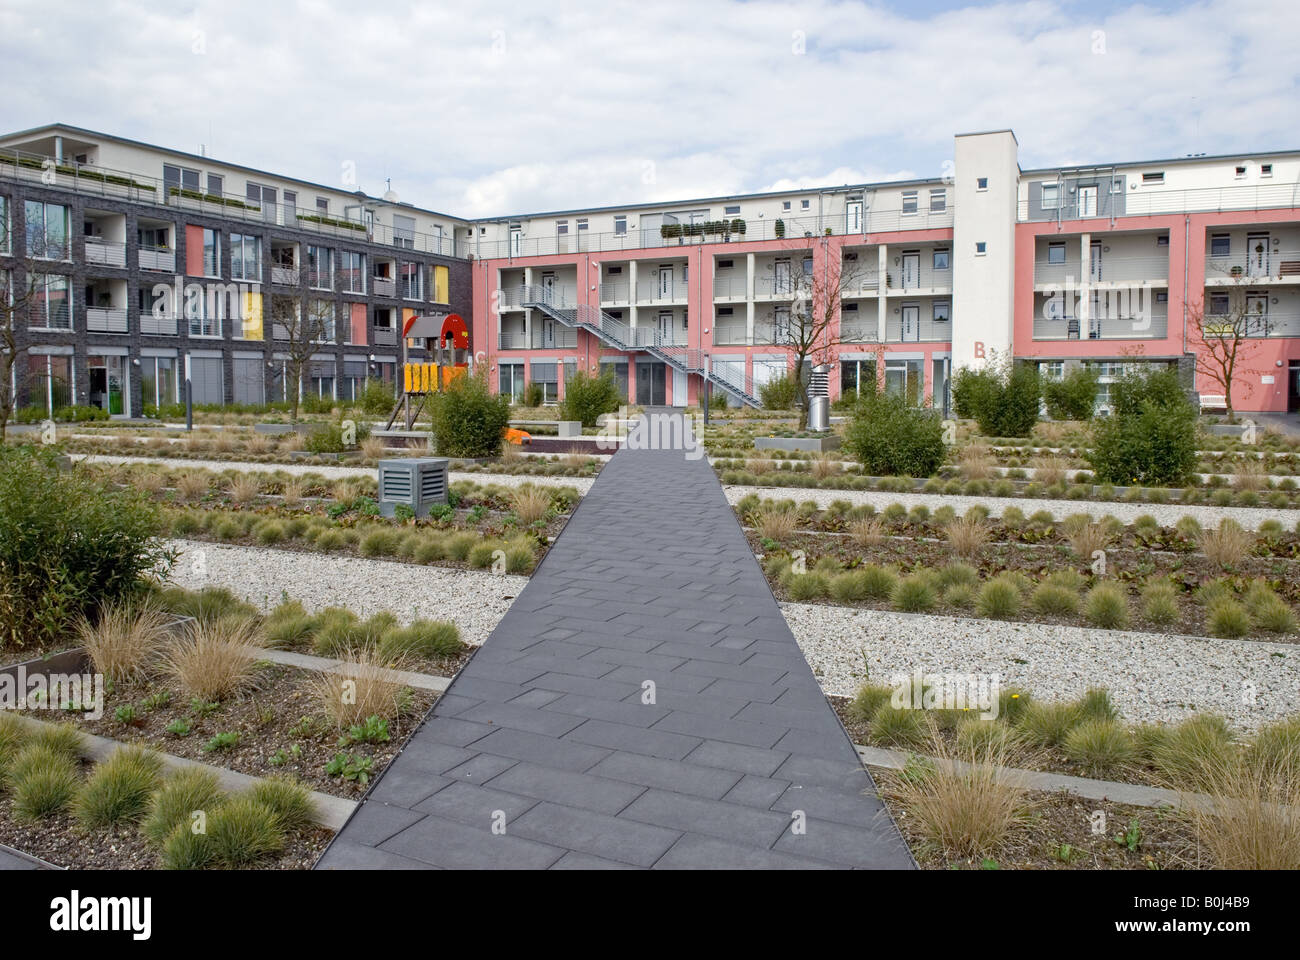 Council housing, with drought resistant gardens, Herne, North Rhine Westphalia, Germany. Stock Photo